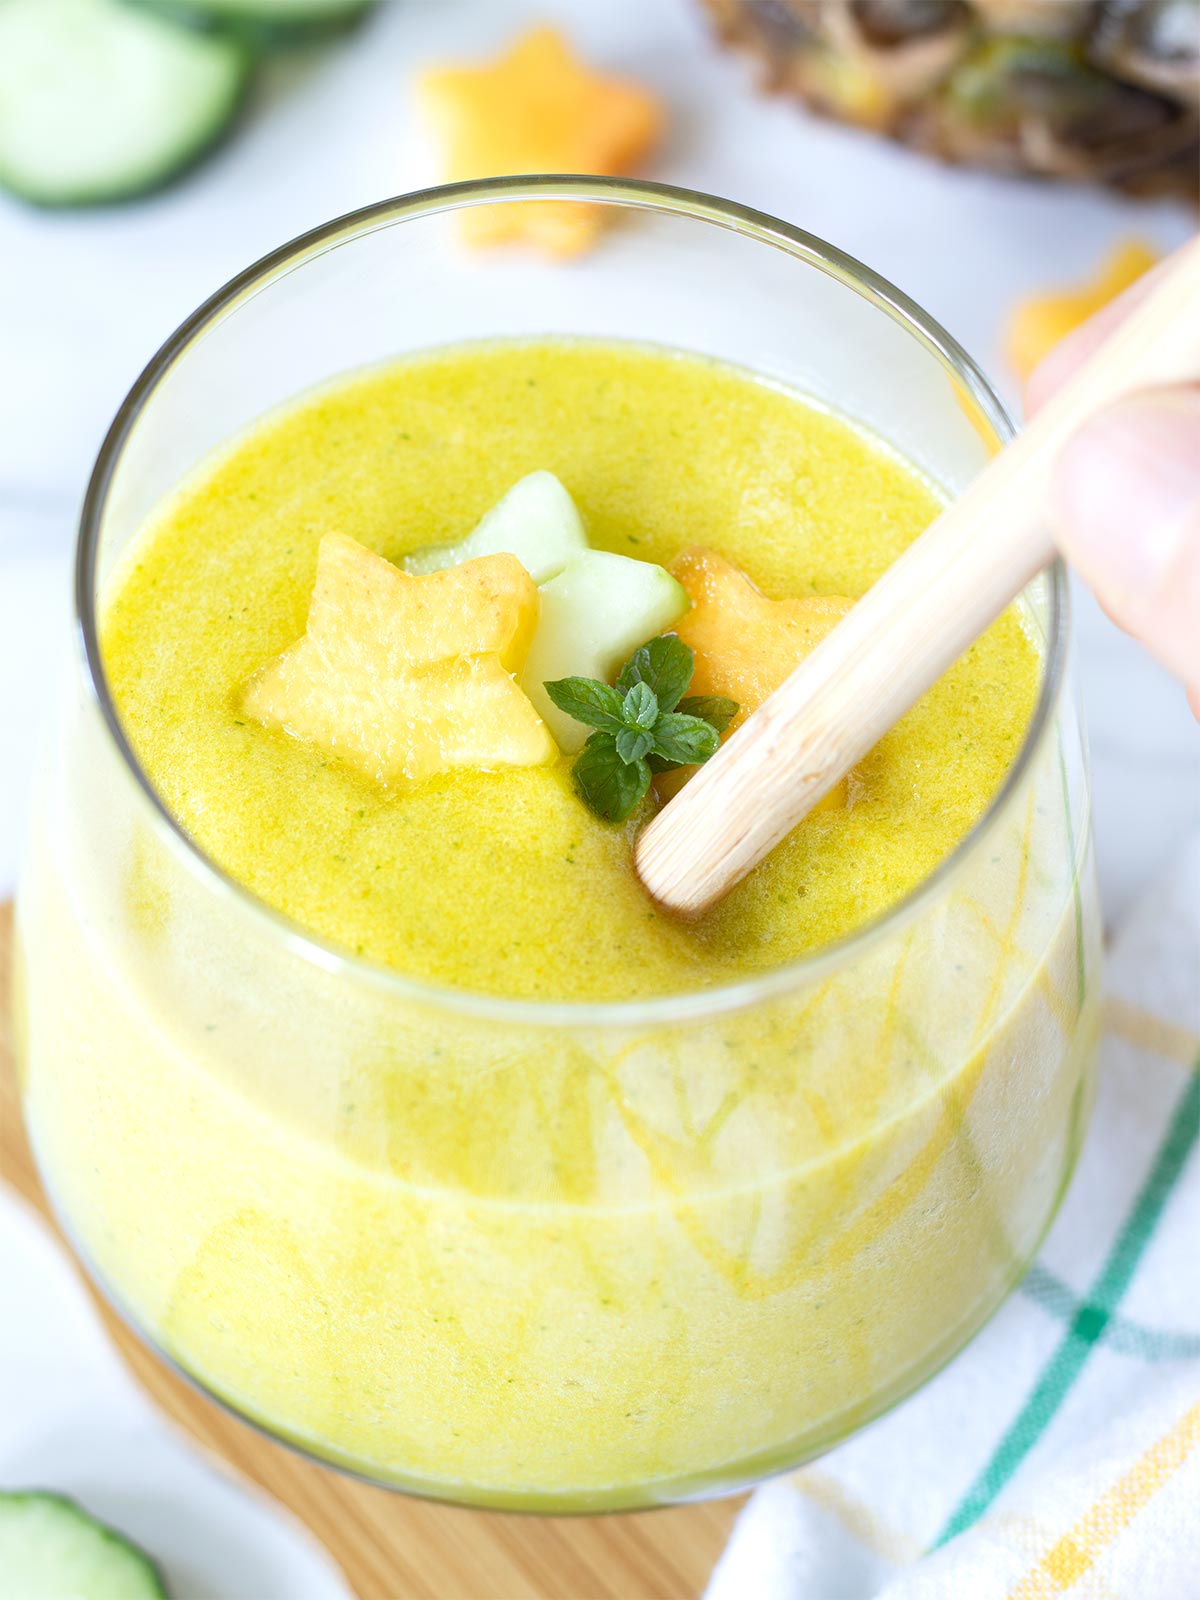 Detox pineapple cucumber lemon smoothie with bright yellow color in a glass with bamboo straw.